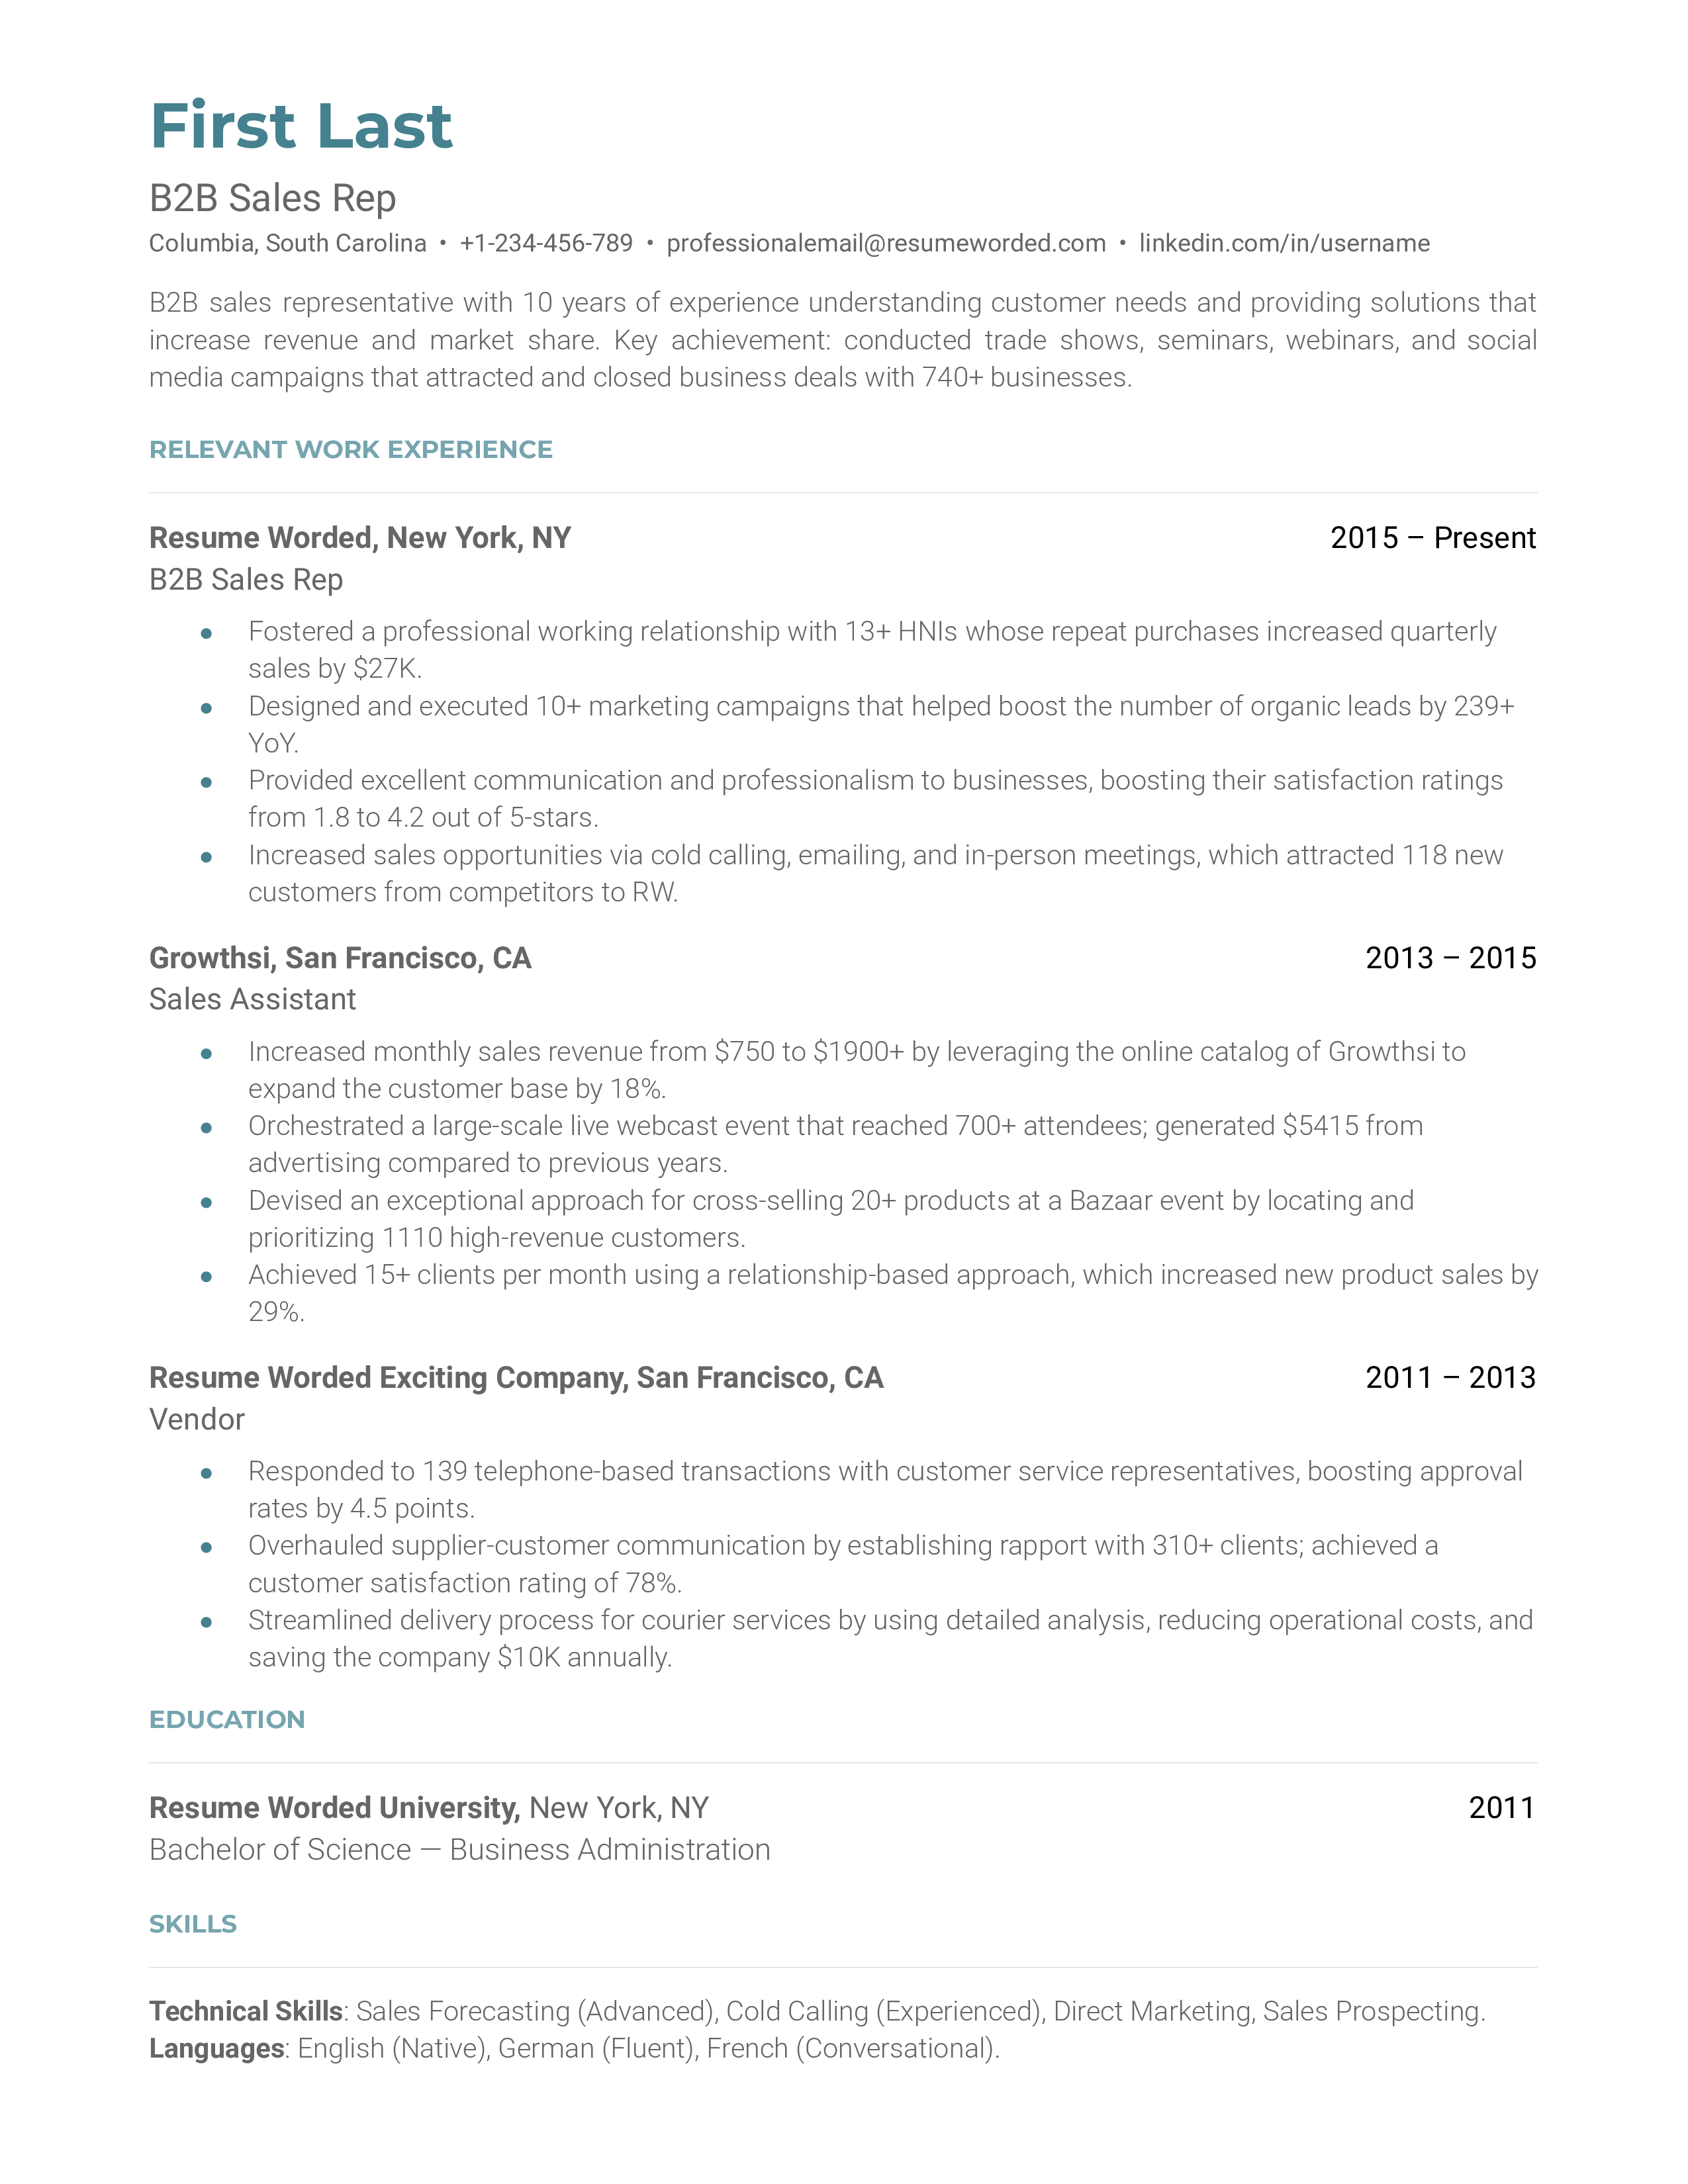 A B2B sales rep resume template that uses metrics to emphasize achievements.